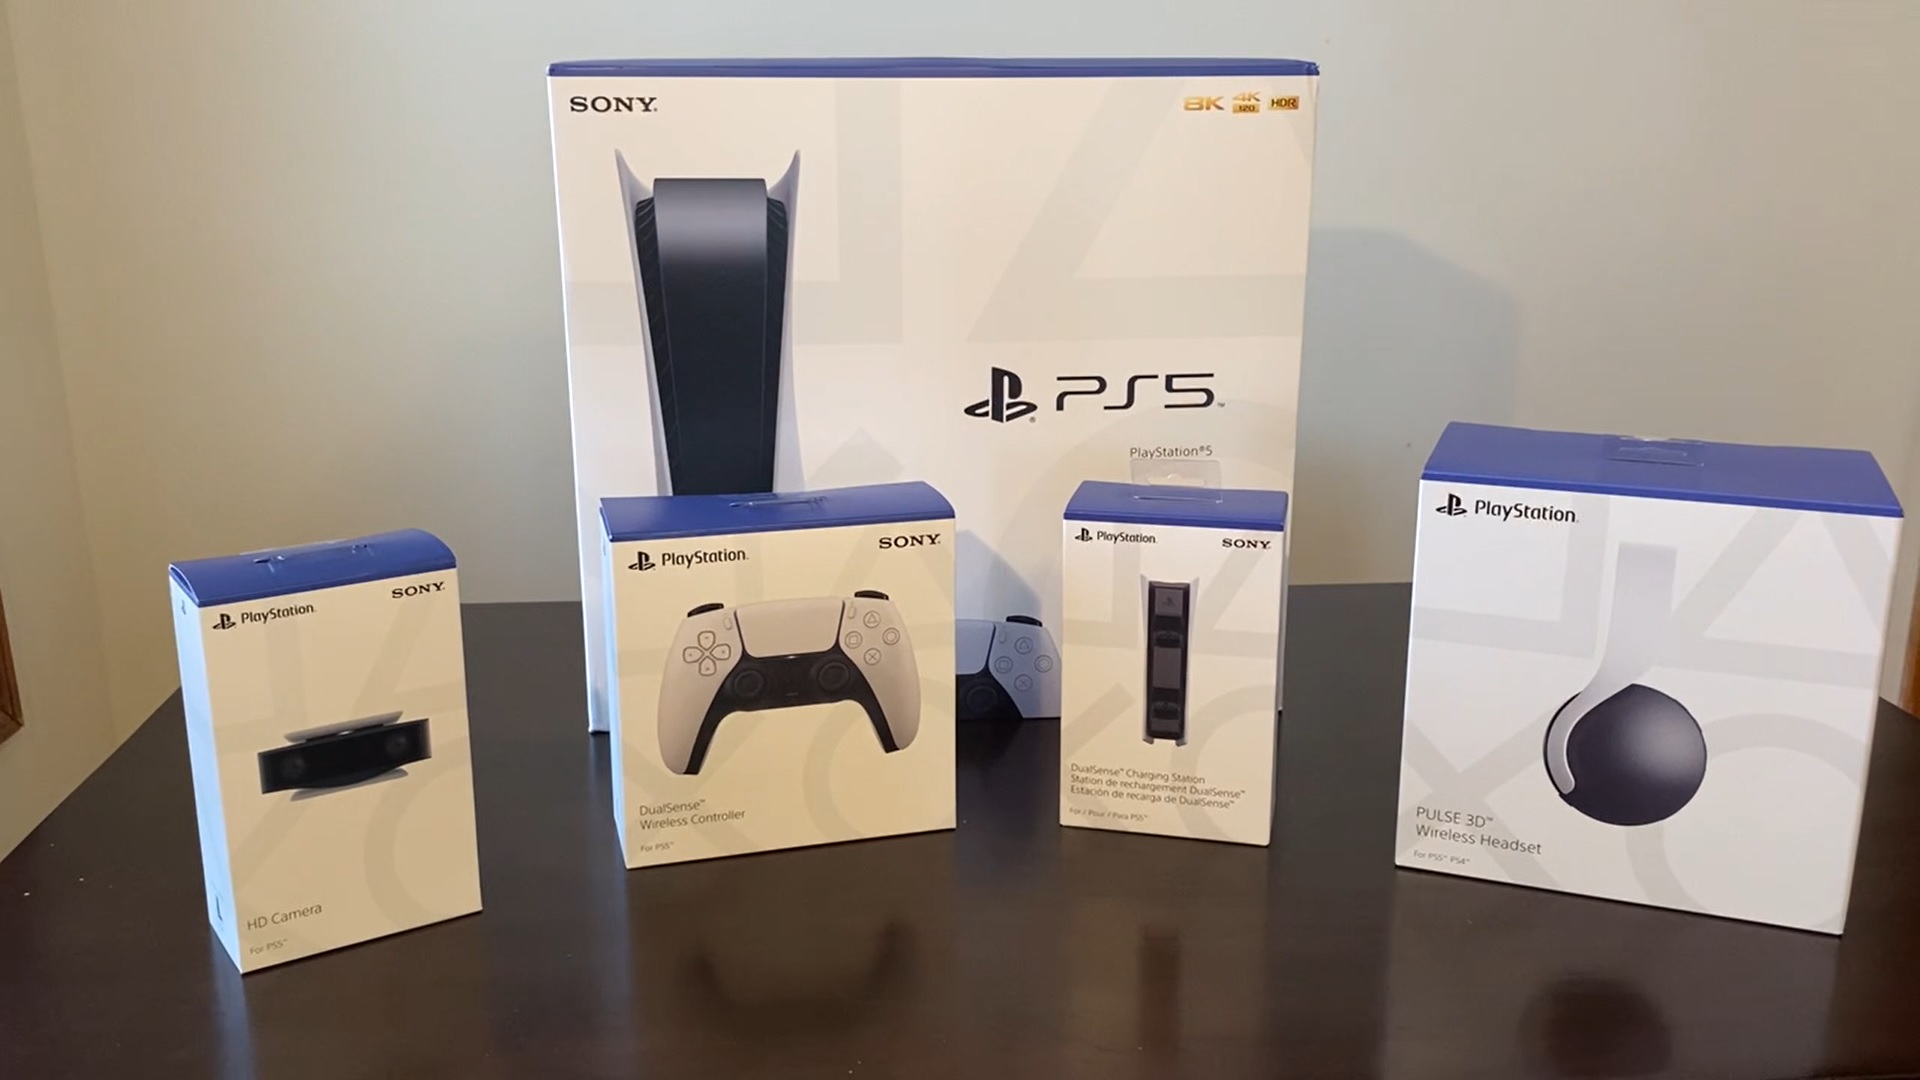 PS5 Unboxed (PLUS UNBOXING VIDEO), PlayStation 5 Disc Version